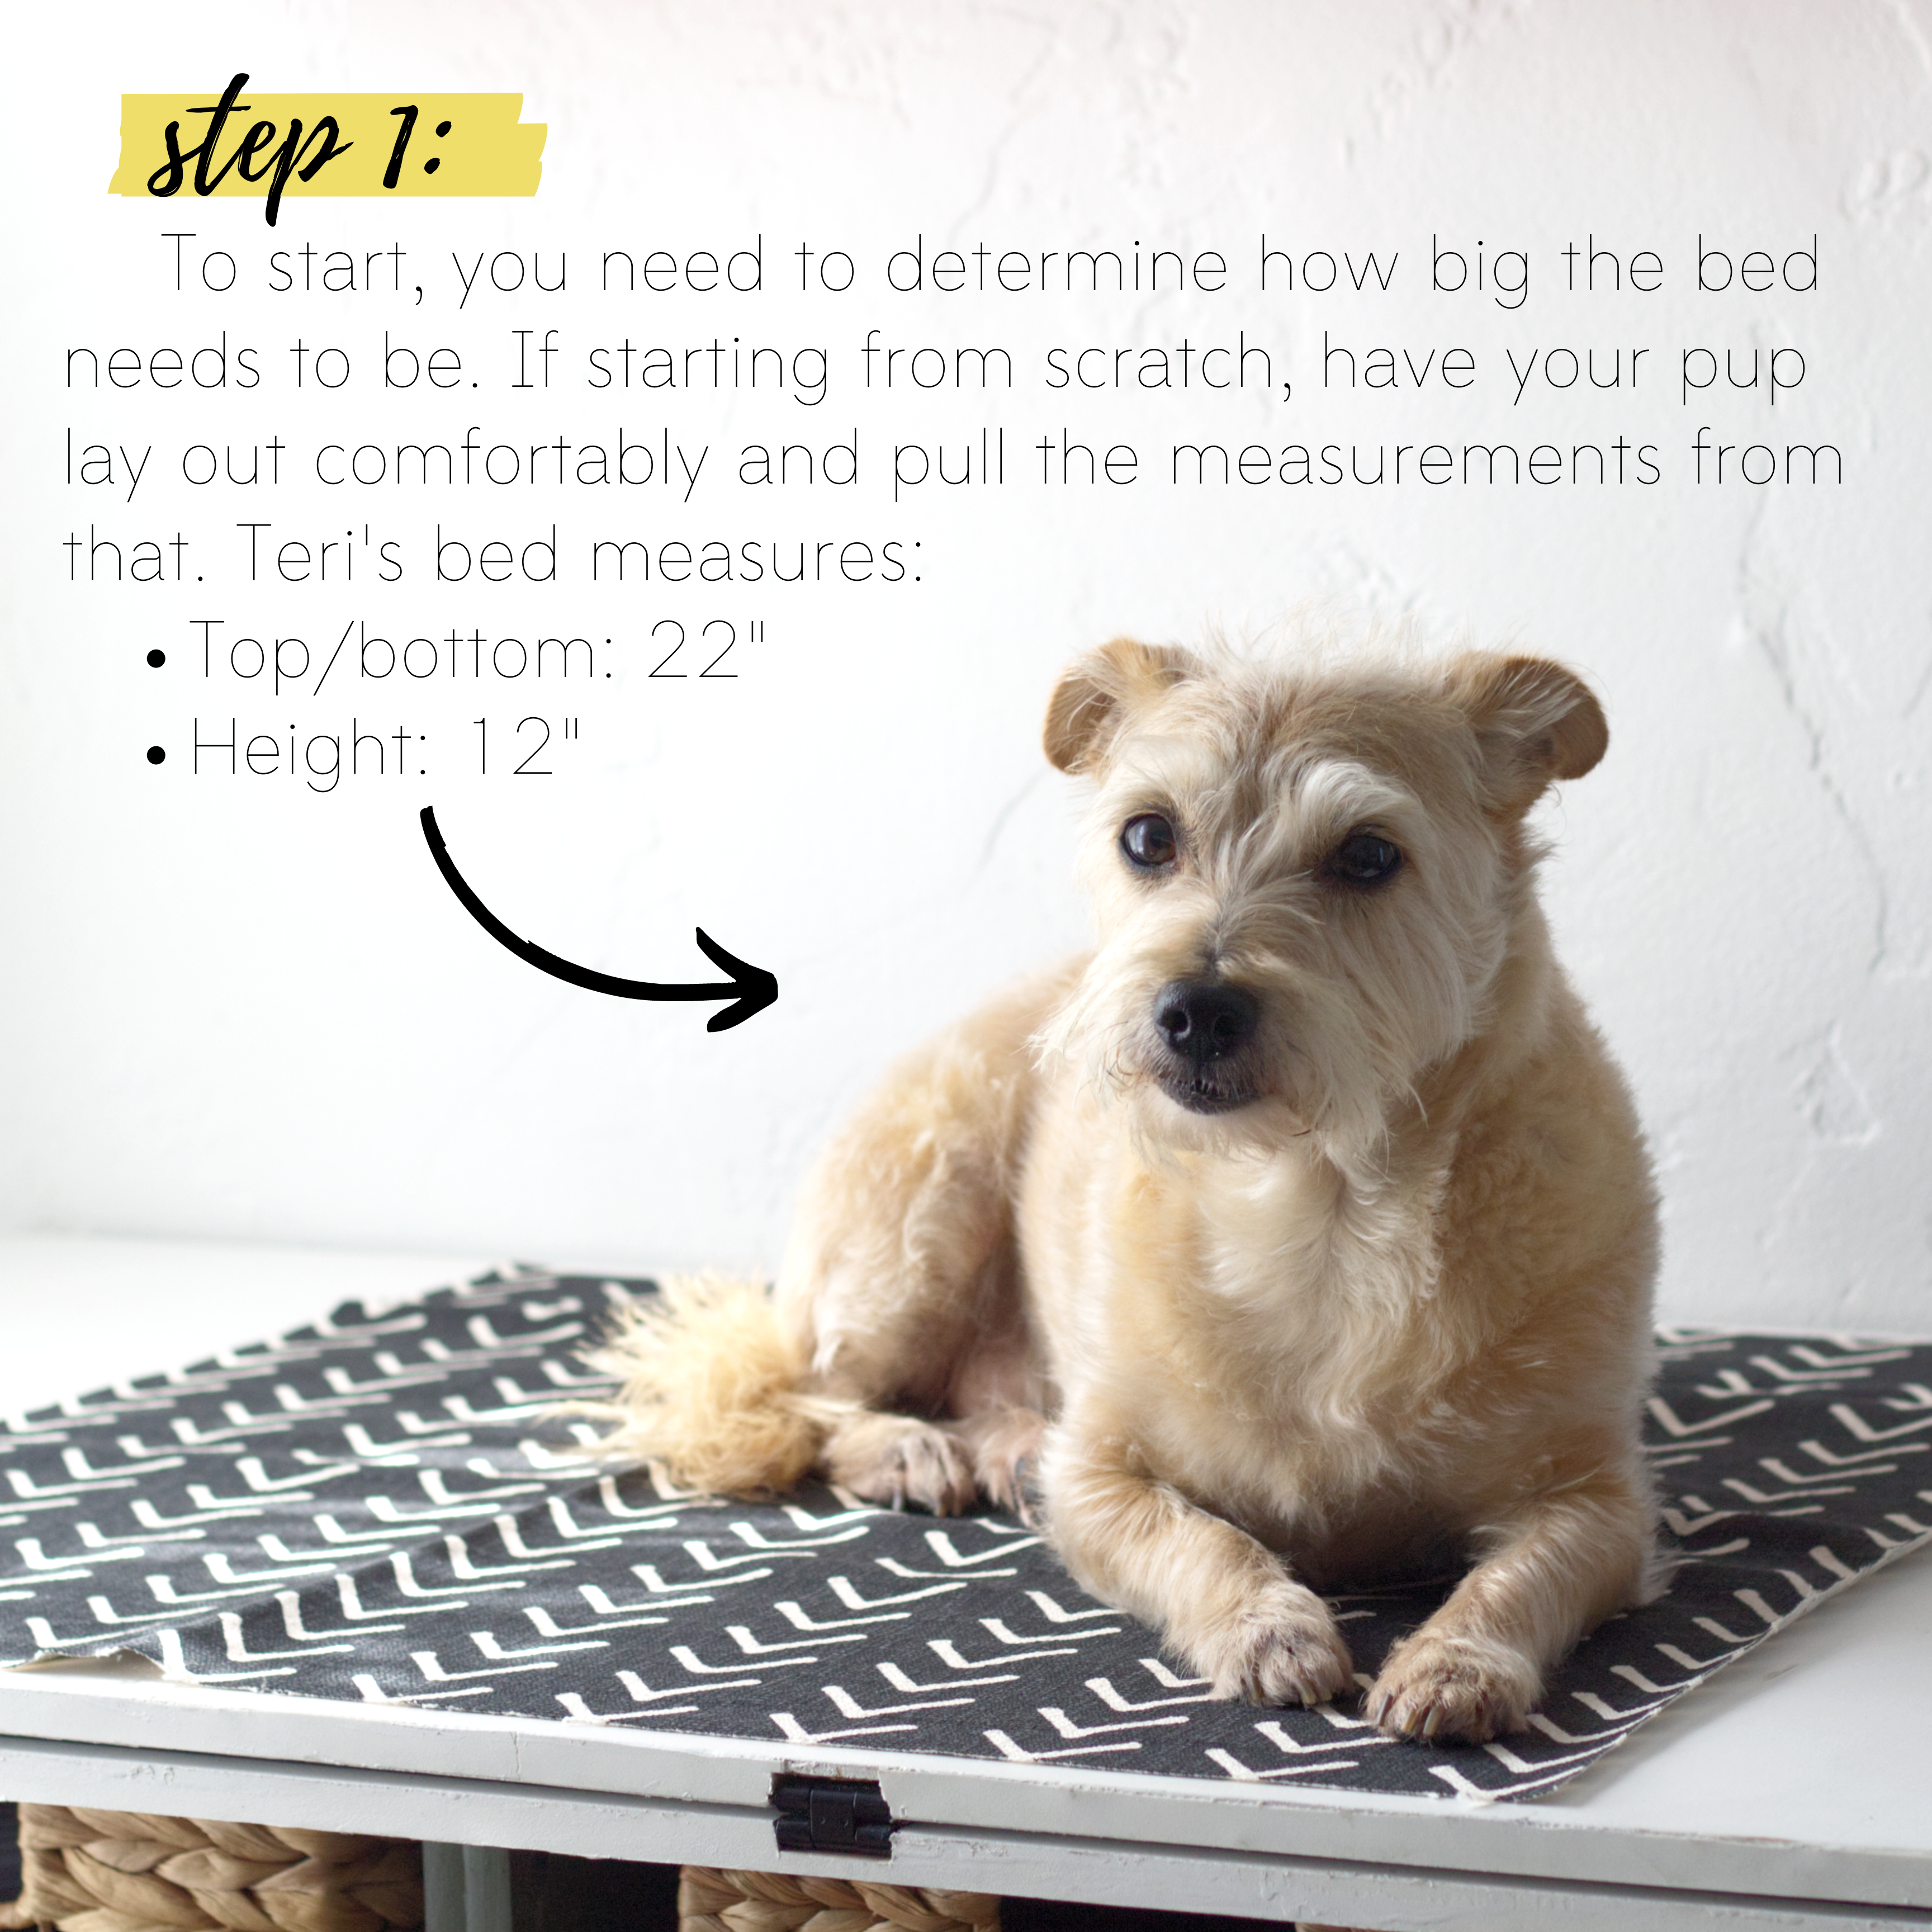 How to sew an easy pet bed DIY sewing tutorial: Step 1